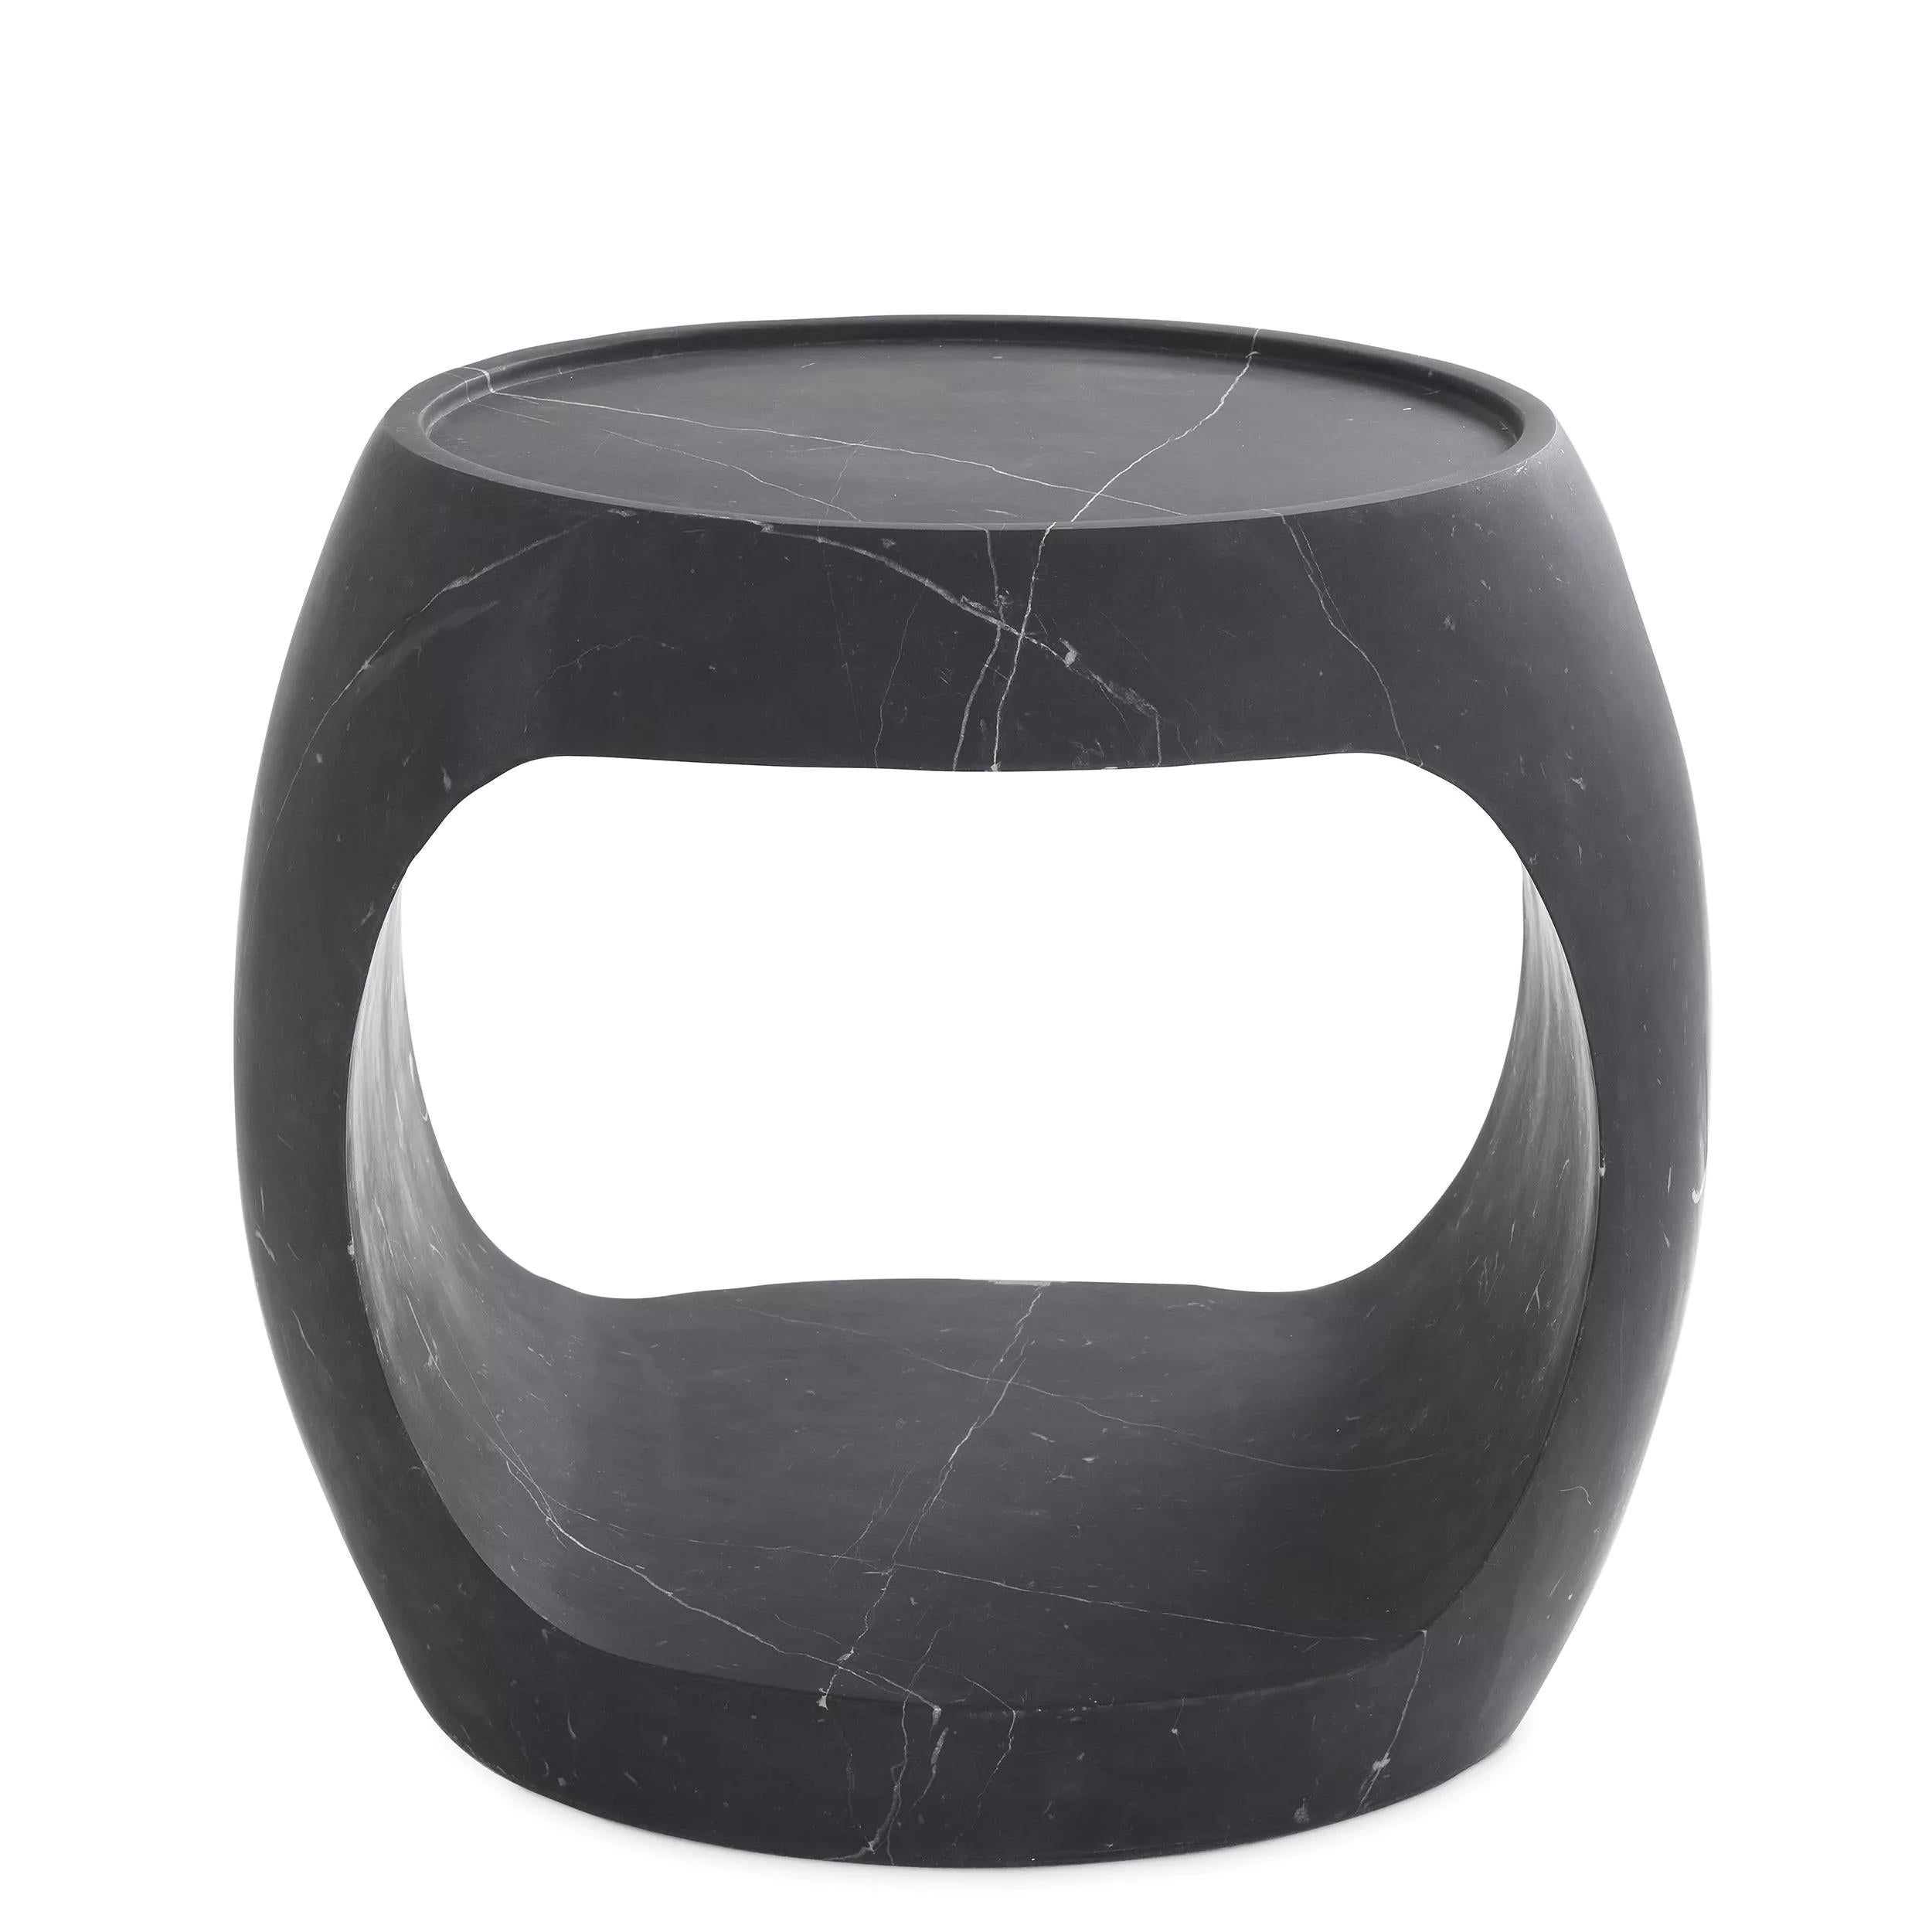 Carved from a solid block, this hollowed oval shaped marble side table is hand-crafted and honed for a mat and soft touch finish. Custom marble requests and bespoke dimension available upon request. Please note that marble is a natural product,